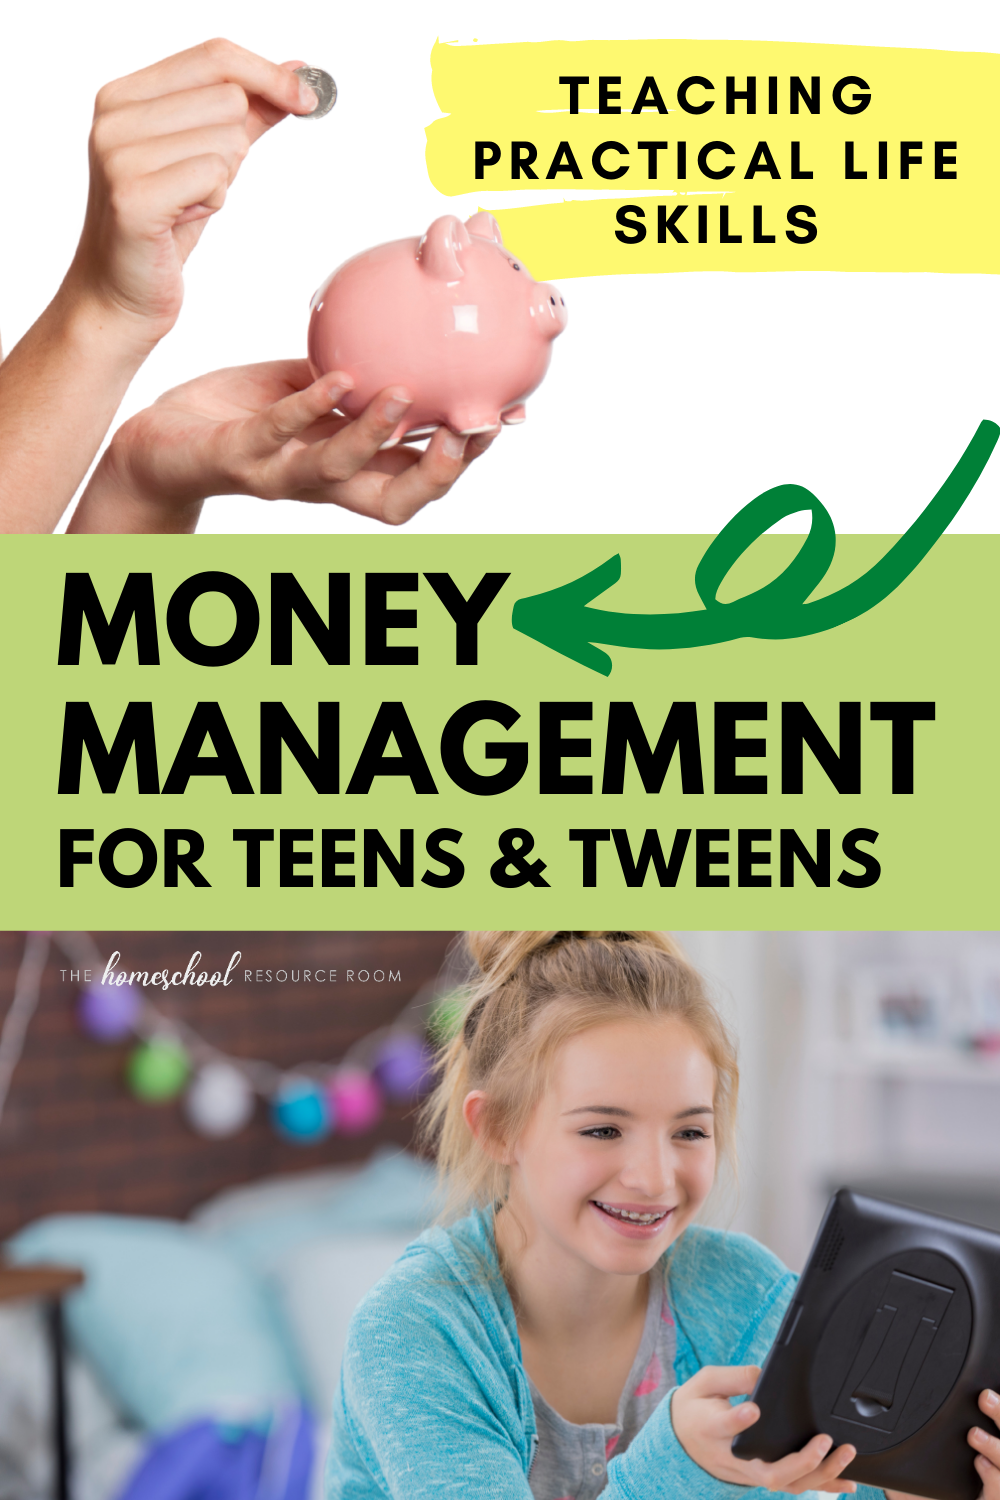 Money management for teens & tweens. Teaching practical life skills, plus recommendation for a program that will help your child with financial literacy and provides additional support for parents.